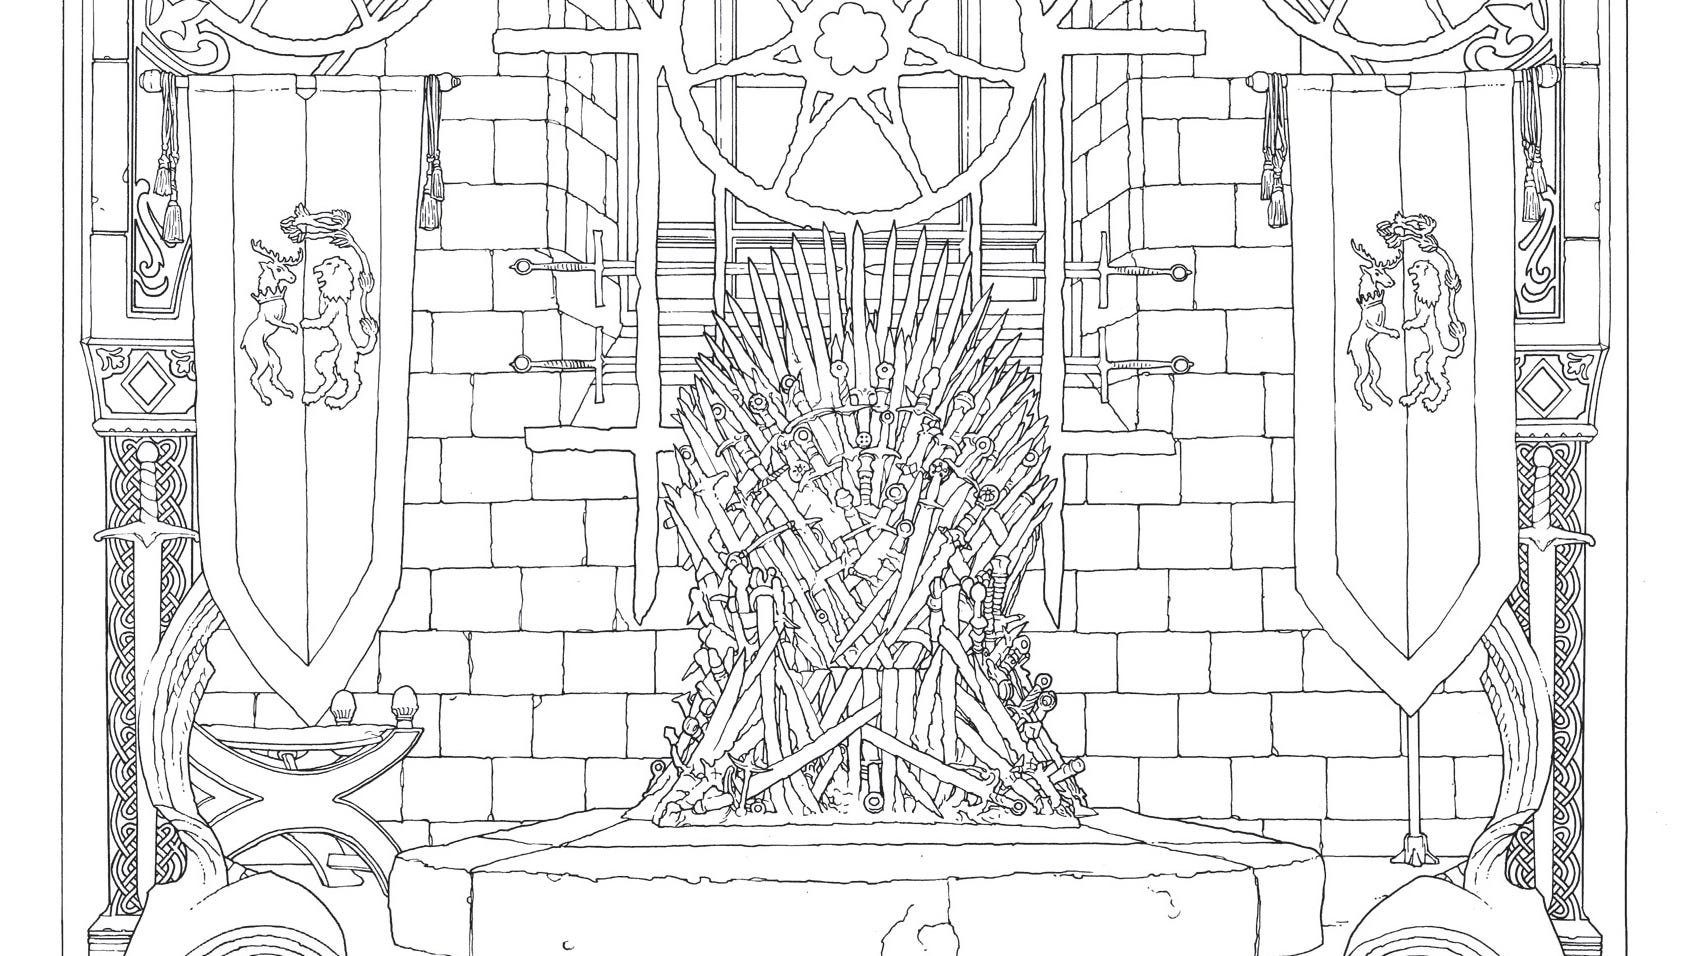 ​HBO's Game of Thrones Coloring Book: The Iron Throne